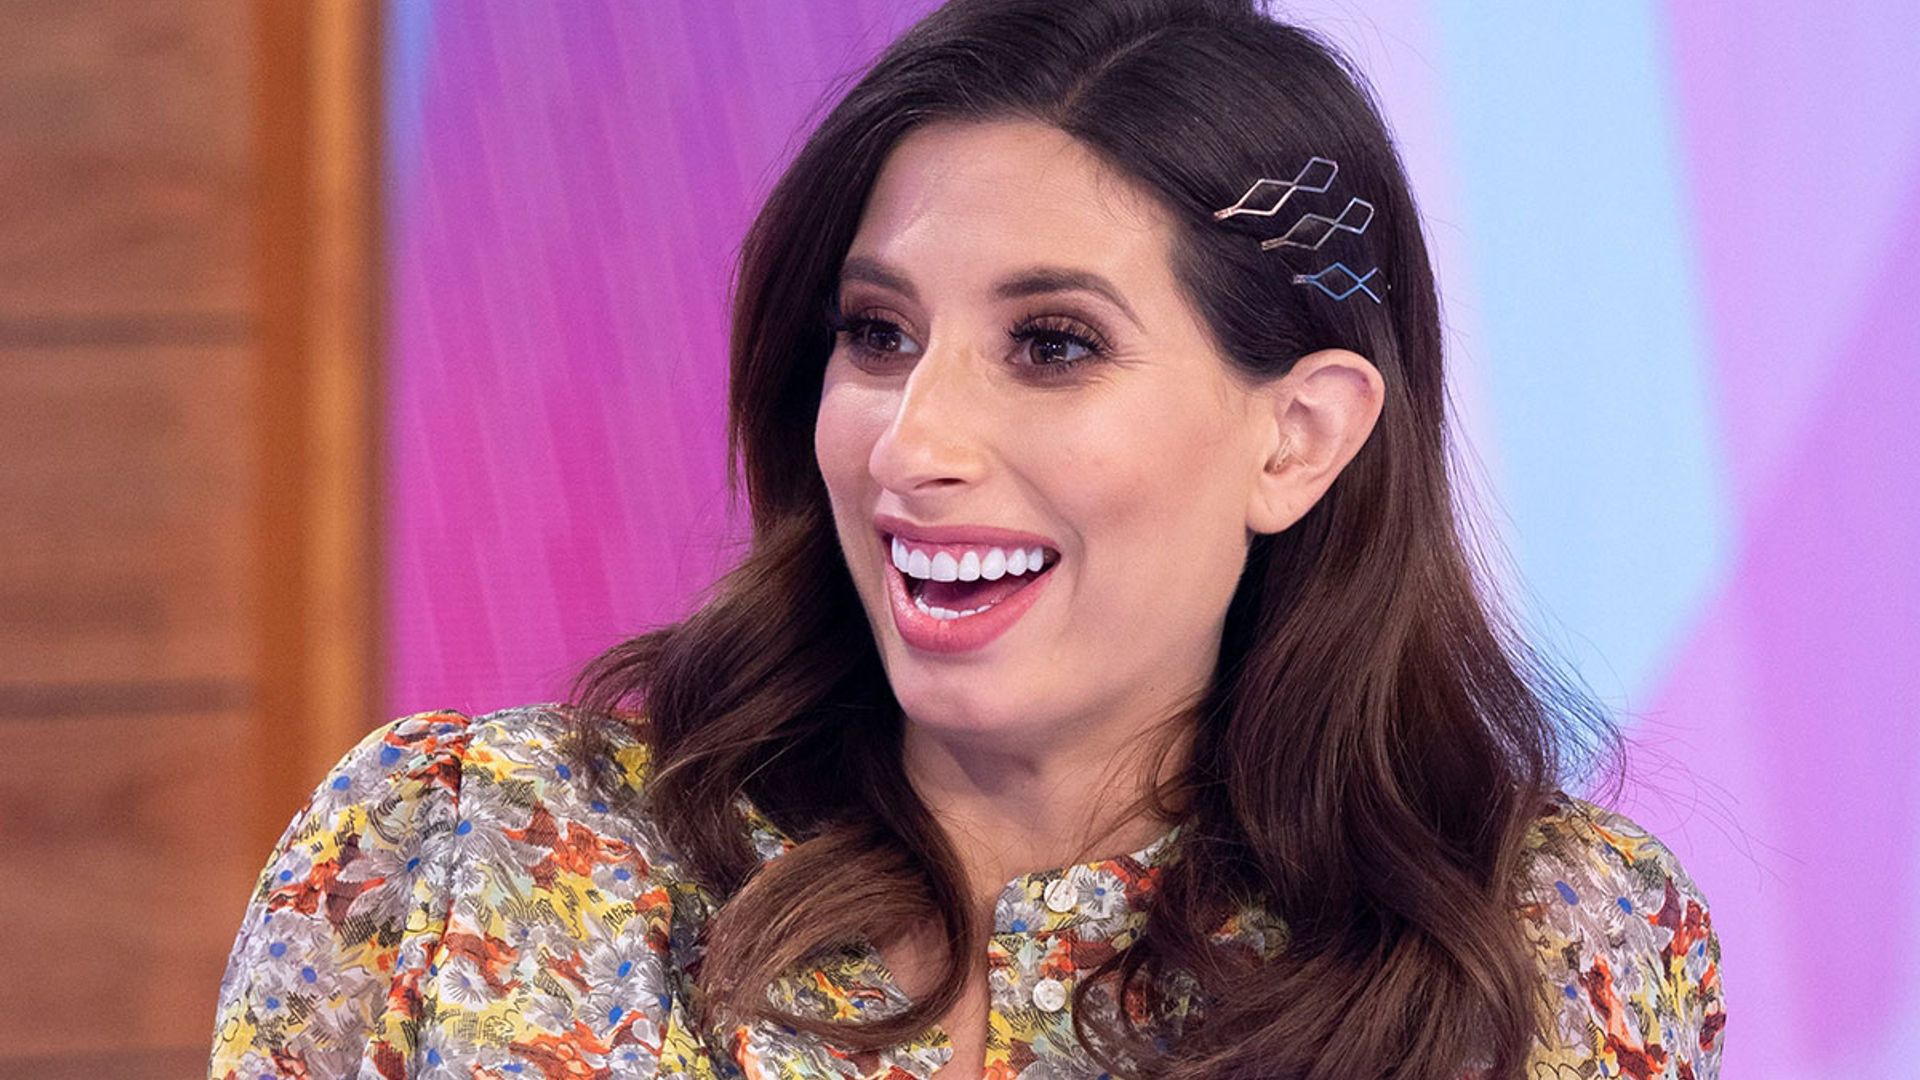 Stacey Solomon's £20 Topshop skirt totally flattered her baby bump